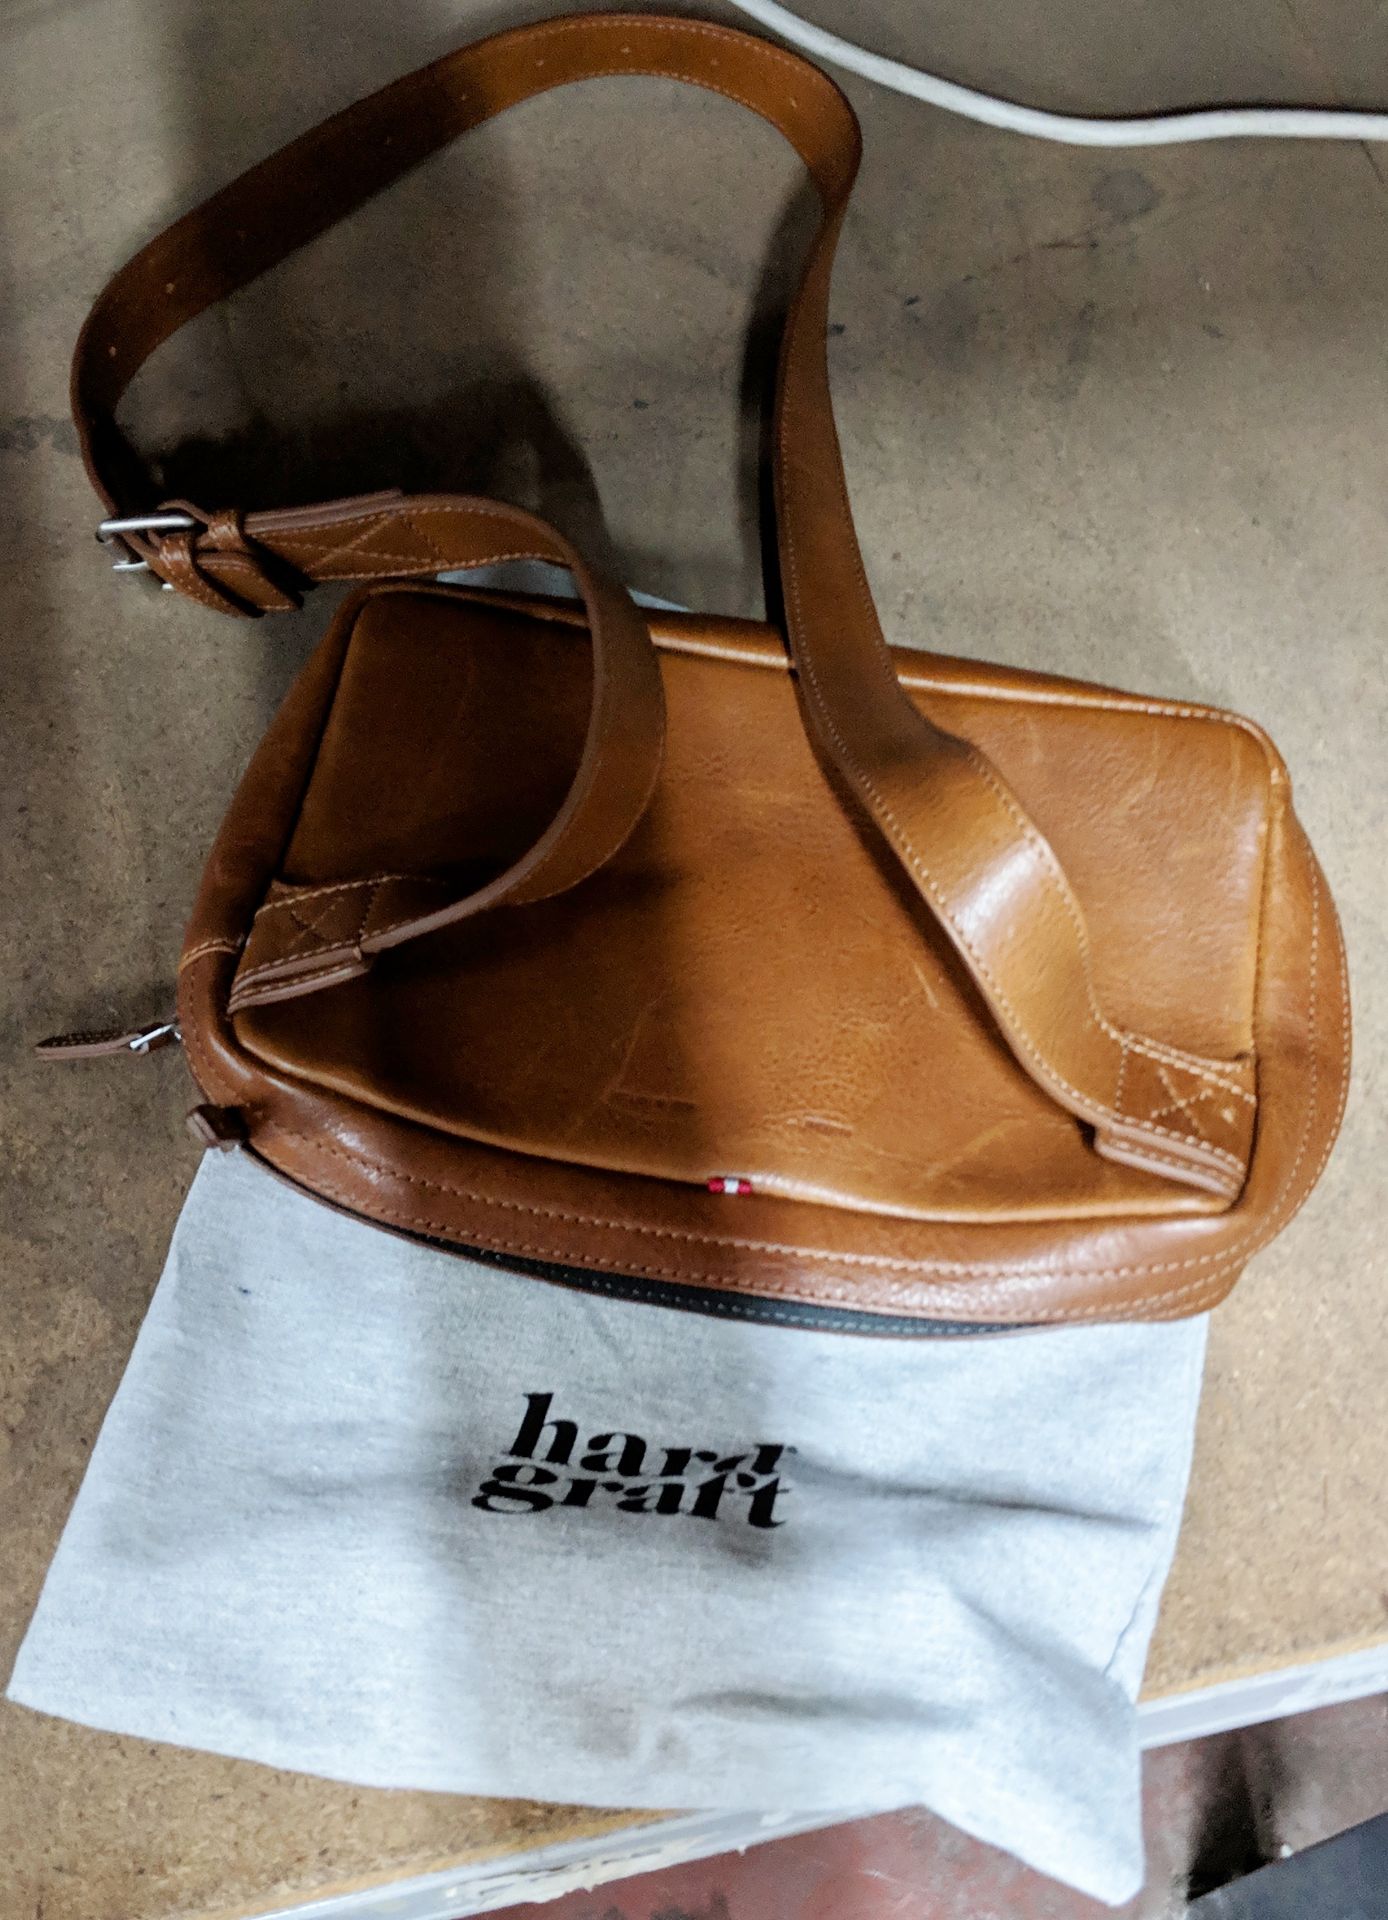 Hard Graft leather "Phone Pack Classic" man bag in brown leather with adjustable strap, including - Image 6 of 8